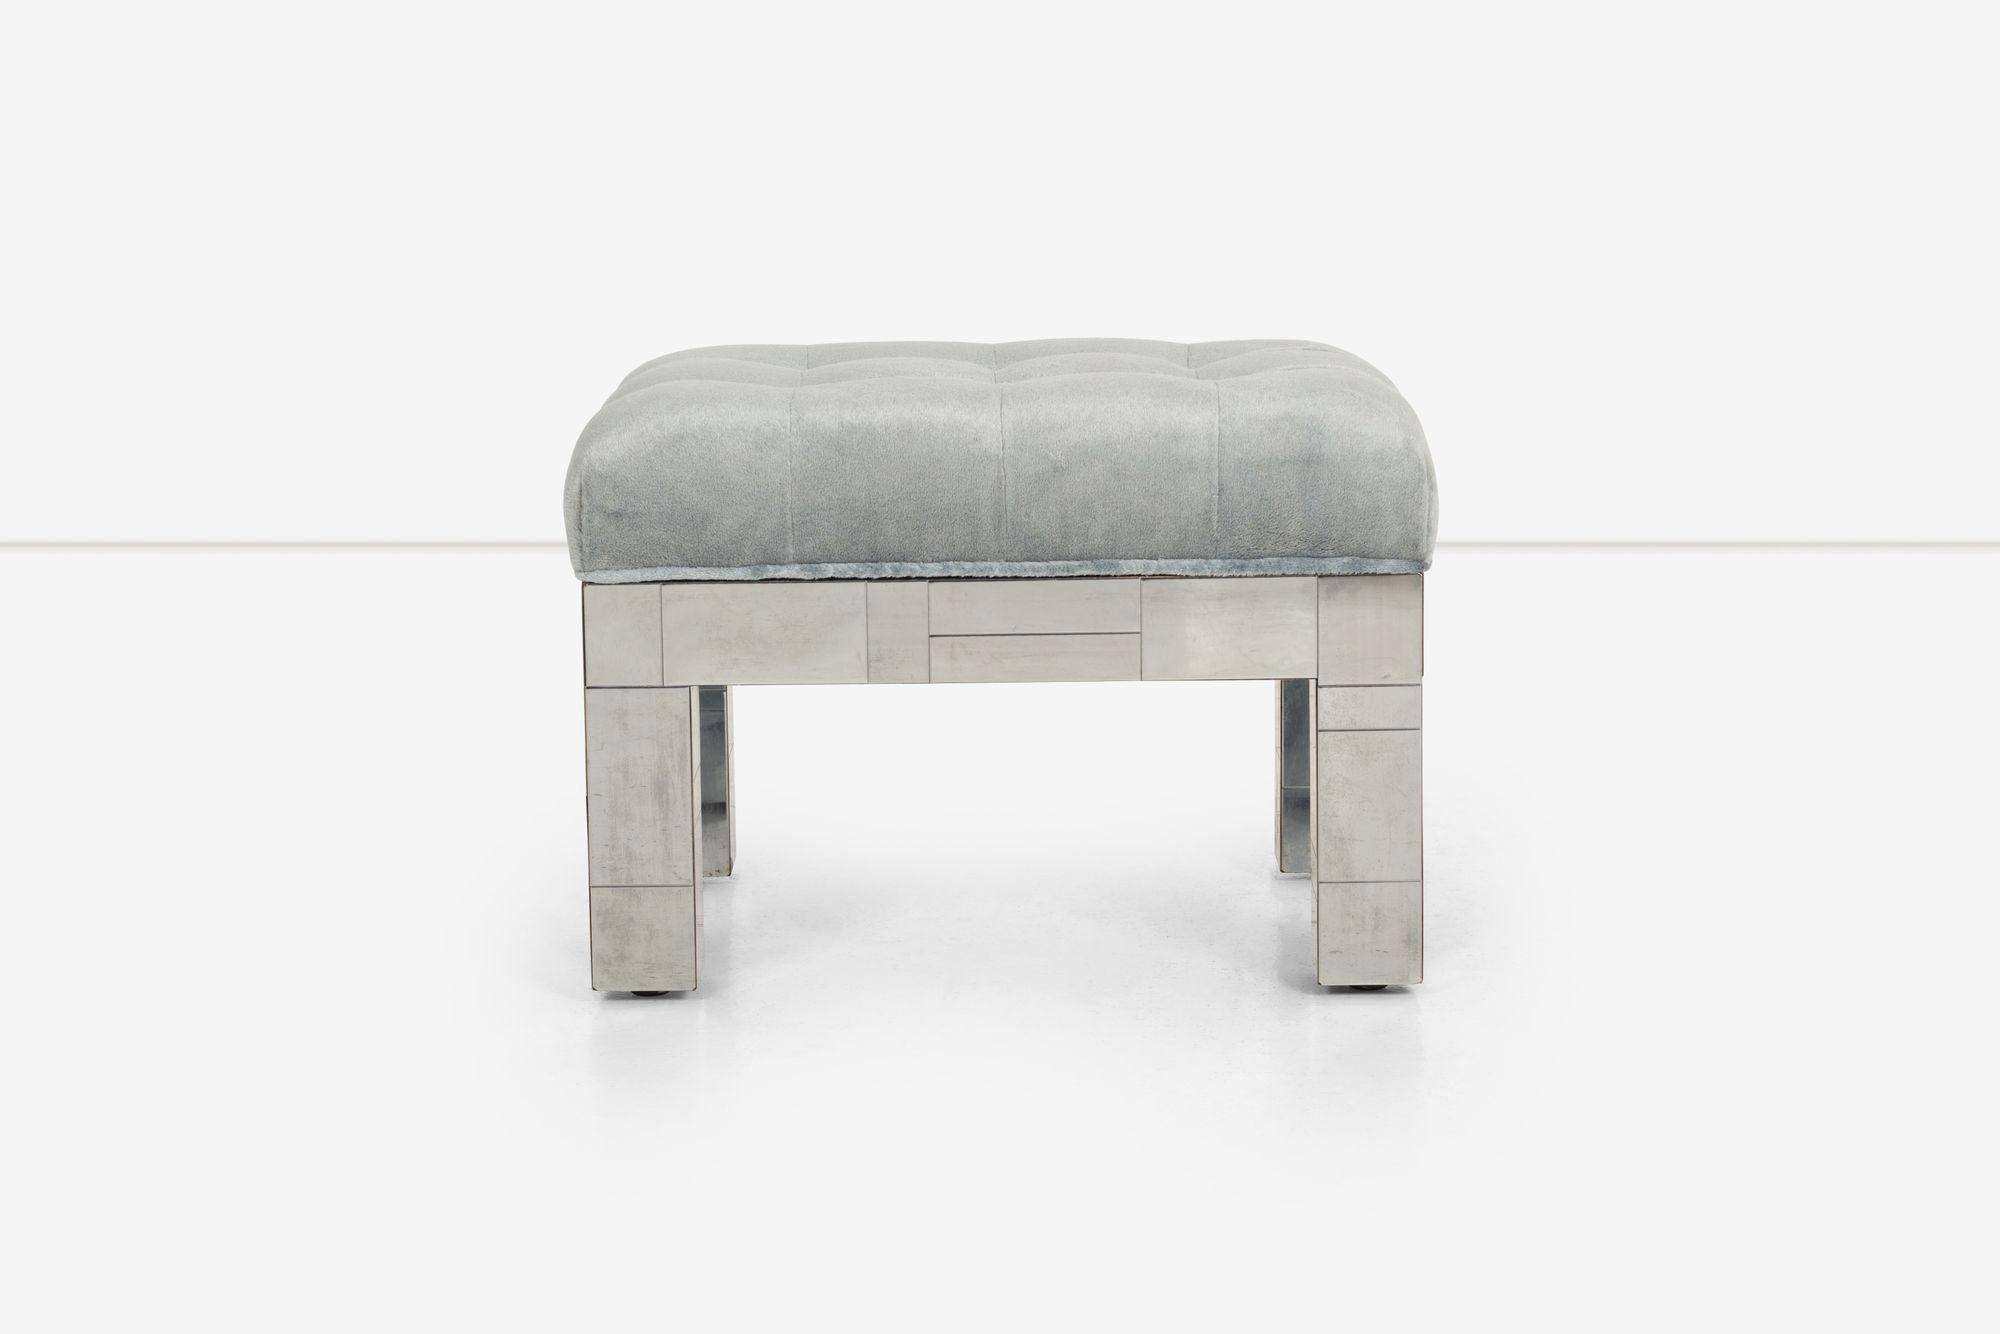 Paul Evans Cityscape Stool Bench 1973, Chrome plated steel with newly upholstered button-tufted mohair.
Label underside Paul Evans Inc. 1973